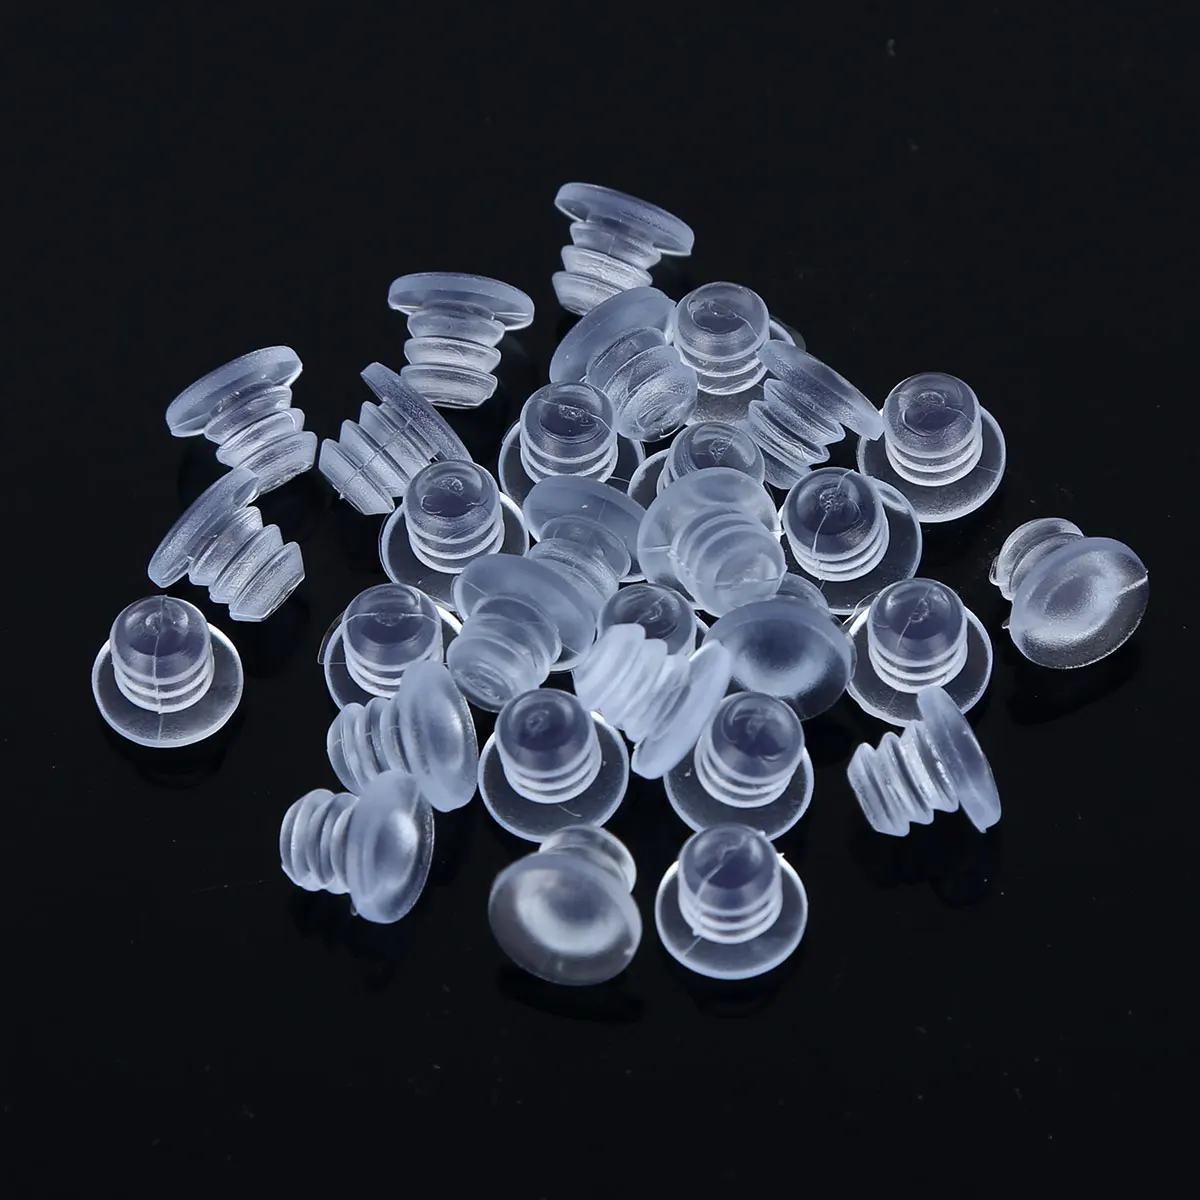 30x Rubber Glass Table Top Spacers Anti Collision Embedded Soft Stem Bumpers New 